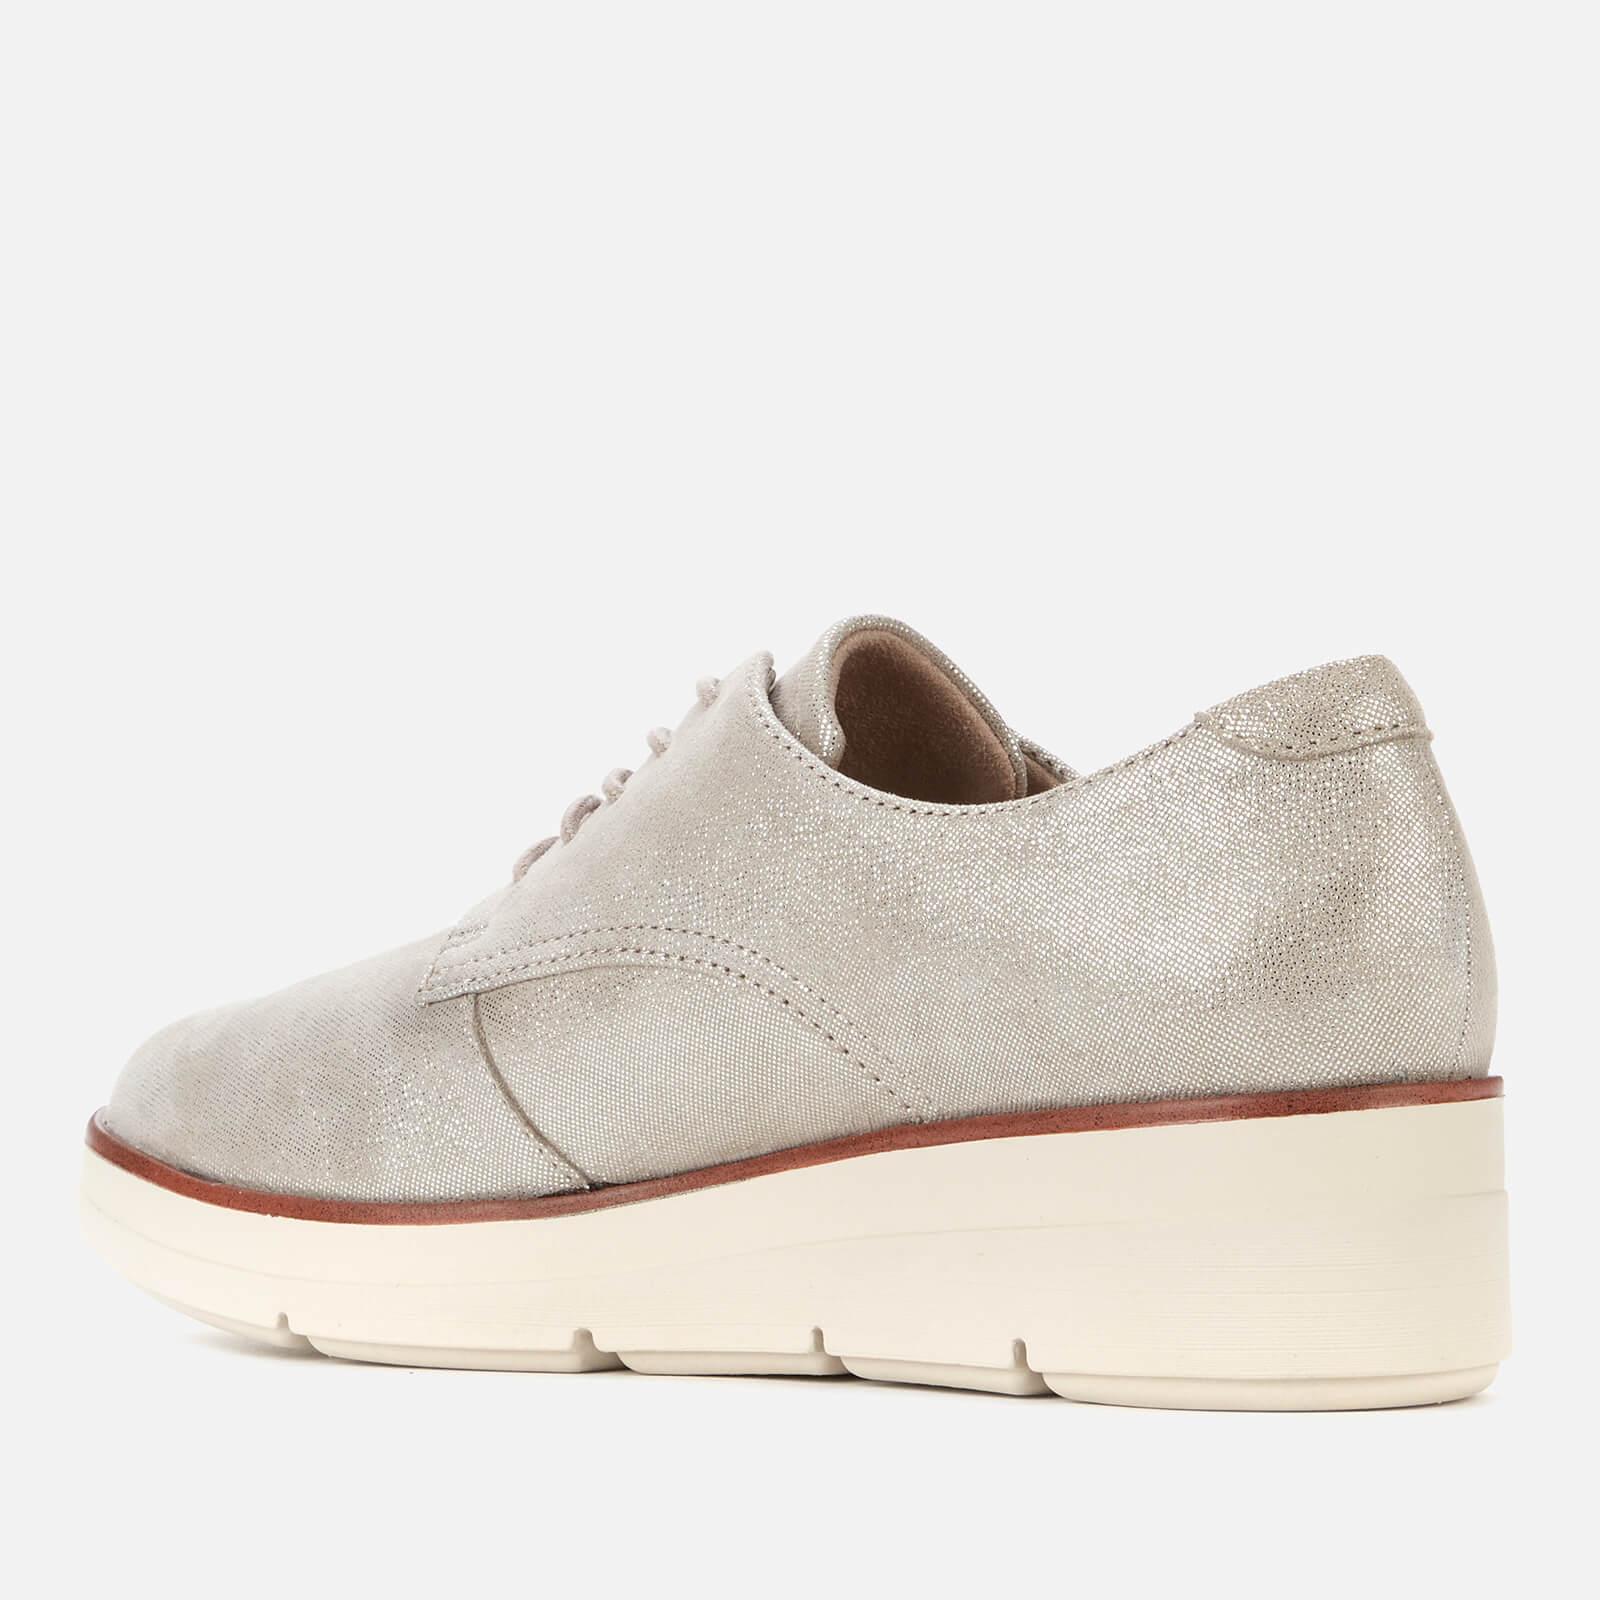 Clarks Shaylin Lace Suede Flatform Shoes in Grey (Gray) | Lyst